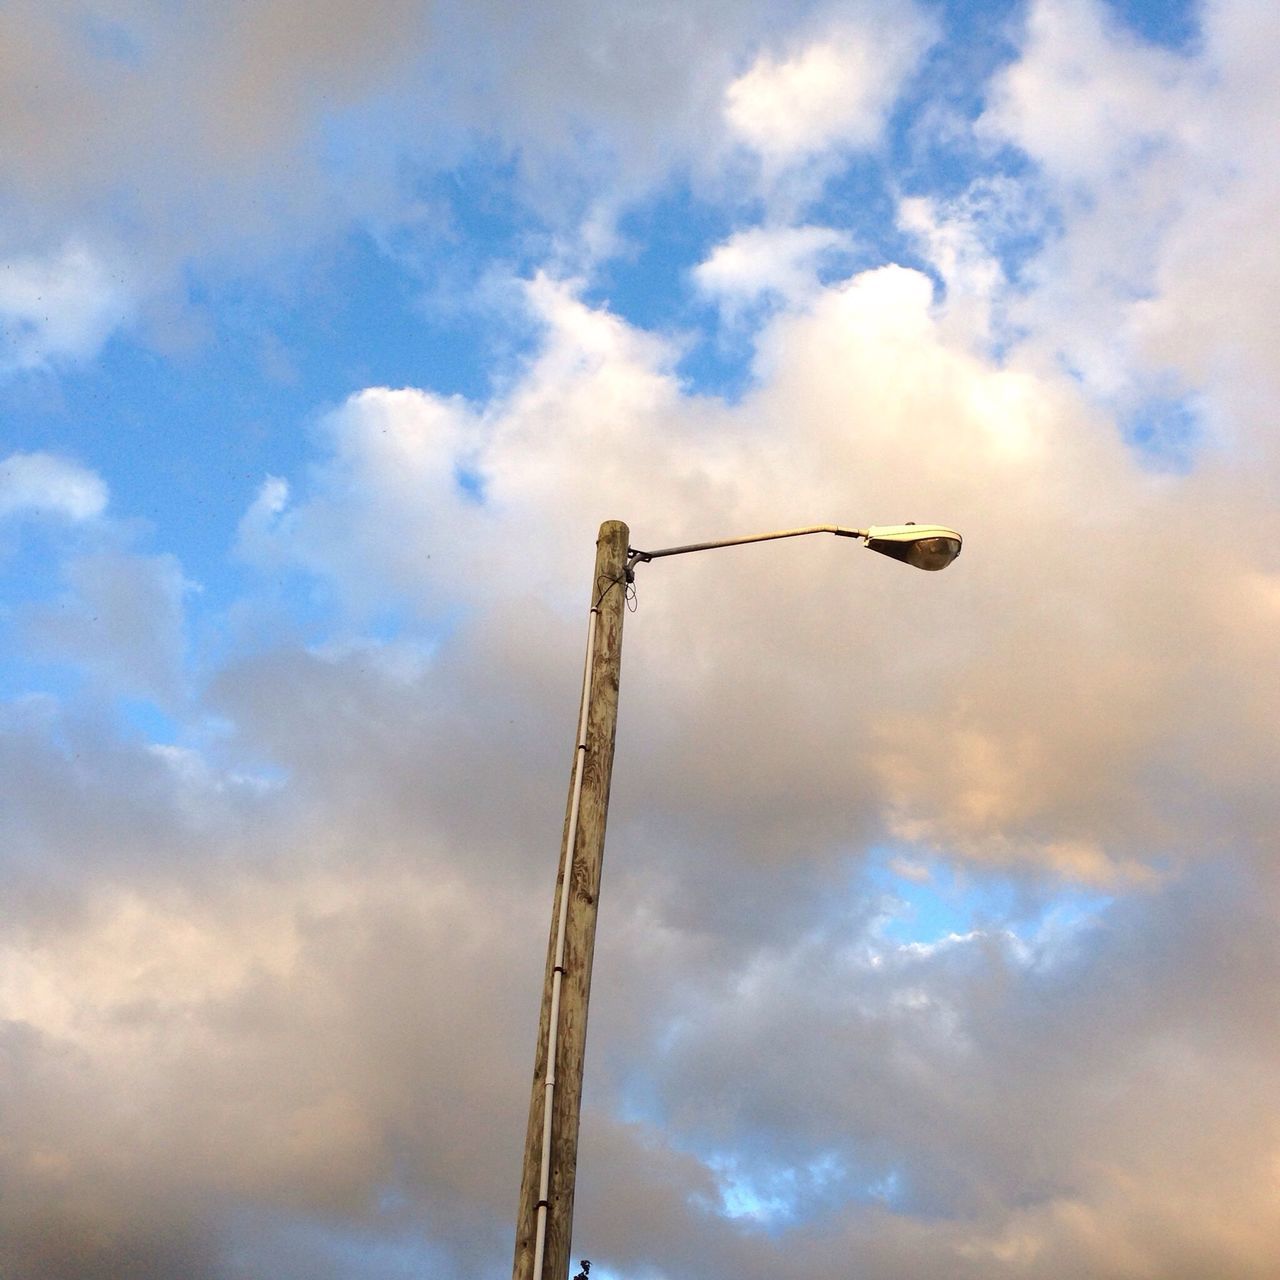 low angle view, sky, cloud - sky, cloudy, cloud, metal, weather, outdoors, overcast, no people, nature, pole, day, silhouette, street light, lighting equipment, dusk, crane - construction machinery, metallic, built structure